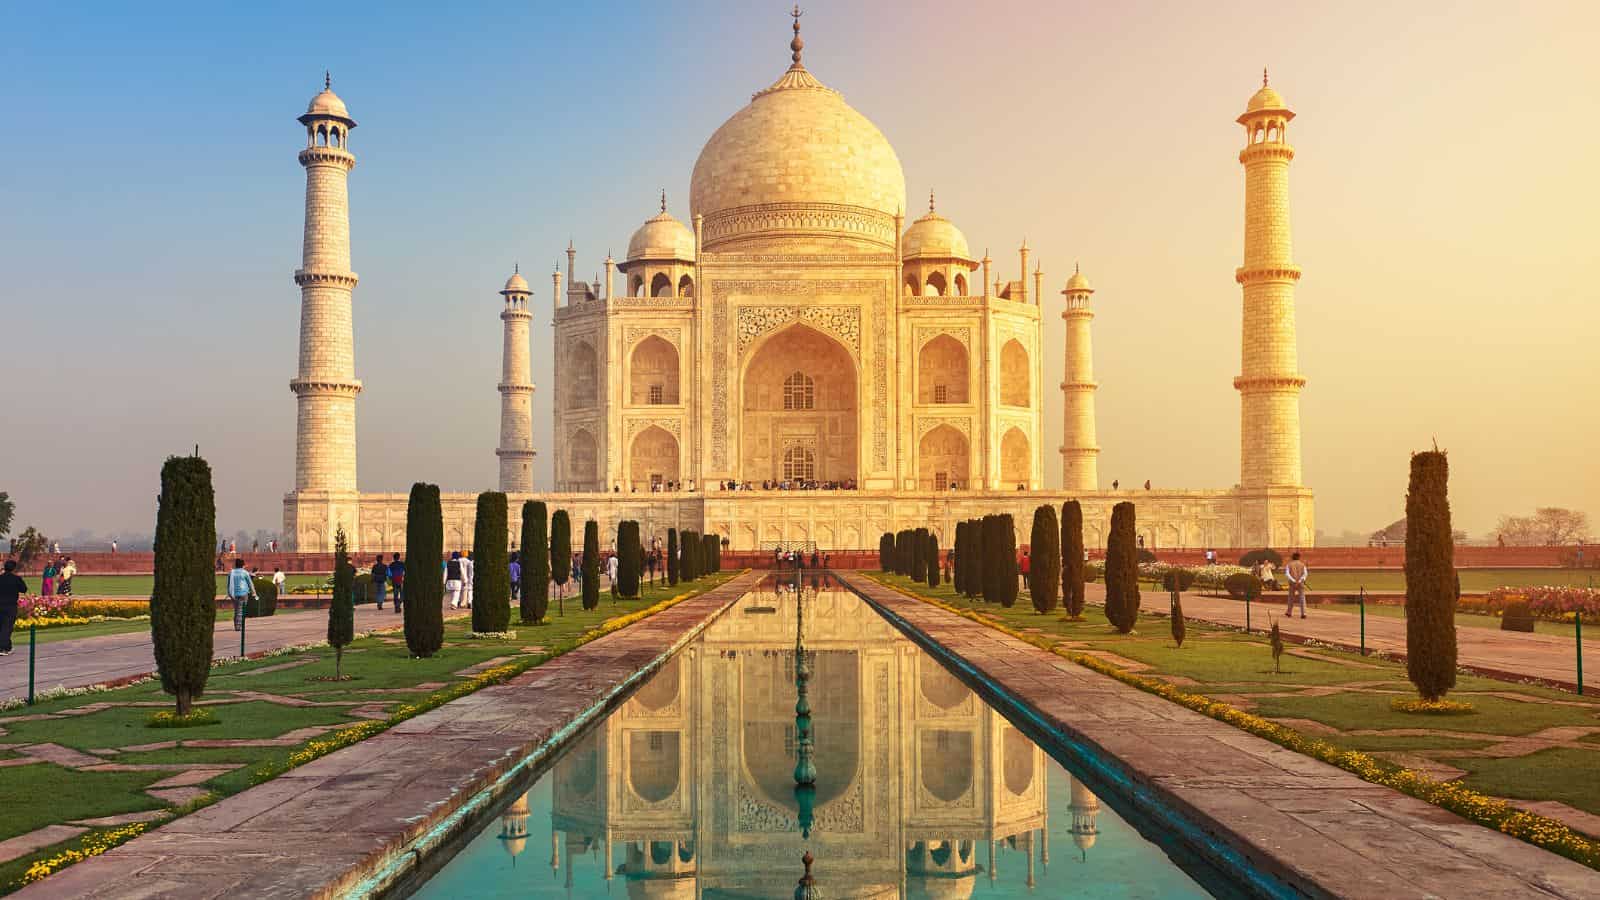 <p>This white marble mausoleum, located in Agra, India, is a symbol of love and loss. According to <a href="https://whc.unesco.org/en/list/252/#:~:text=The%20Taj%20Mahal%20is%20considered,further%20increases%20the%20aesthetic%20aspect.">UNESCO</a>, the beautiful tomb was built by Emperor Shah Jahan in 1632–48 AD, in memory of his beloved wife, Mumtaz Mahal. It combines elements of various architectural styles and has symmetrical gardens with several pools and gateways.</p>